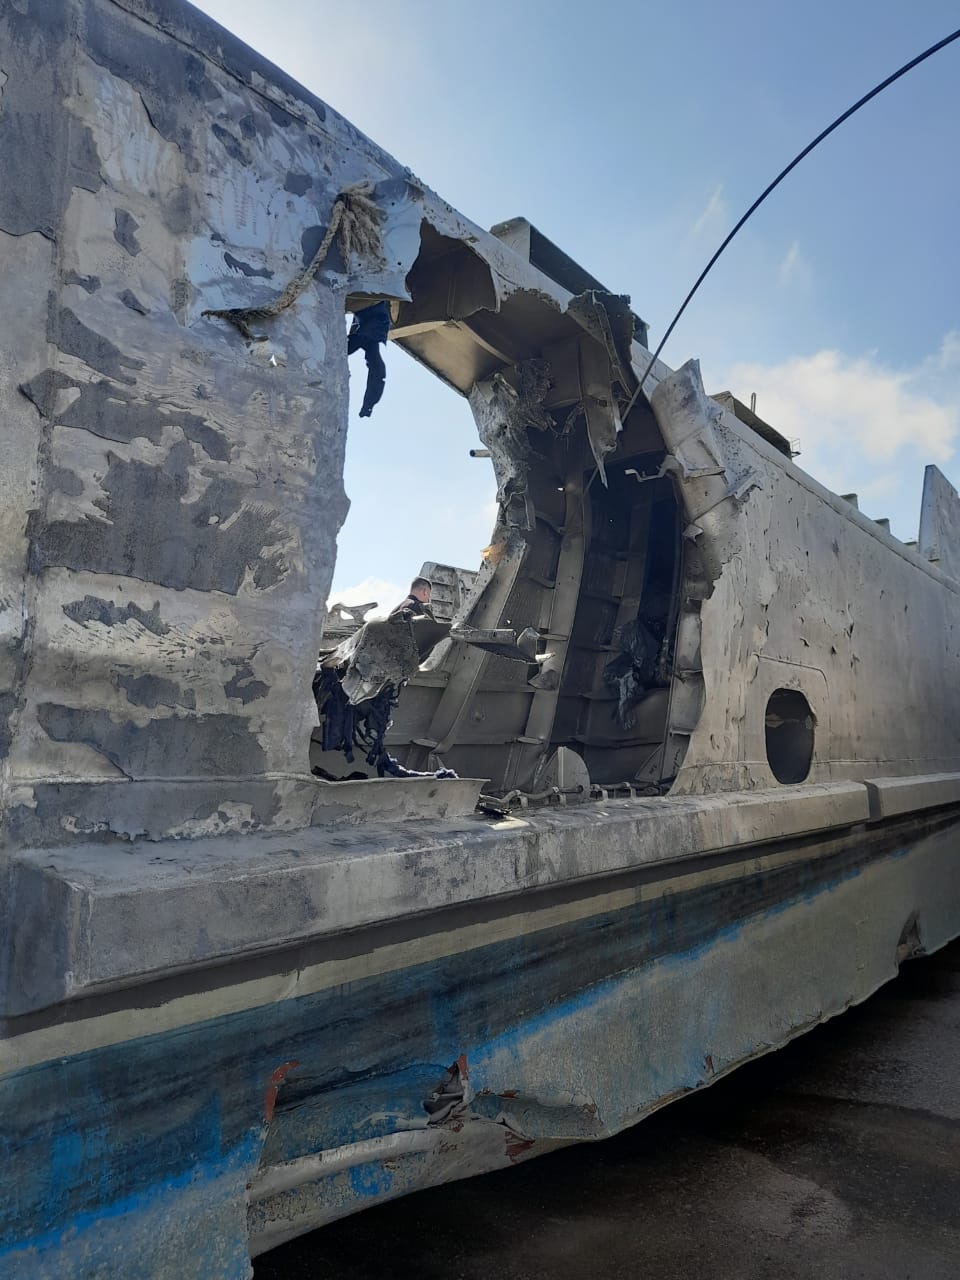 The photo shows the scale of destruction caused to the vessel by a Bayraktar drone of the Ukrainian Armed Forces / This Ship Got Attacked by a Bayraktar (Photo)